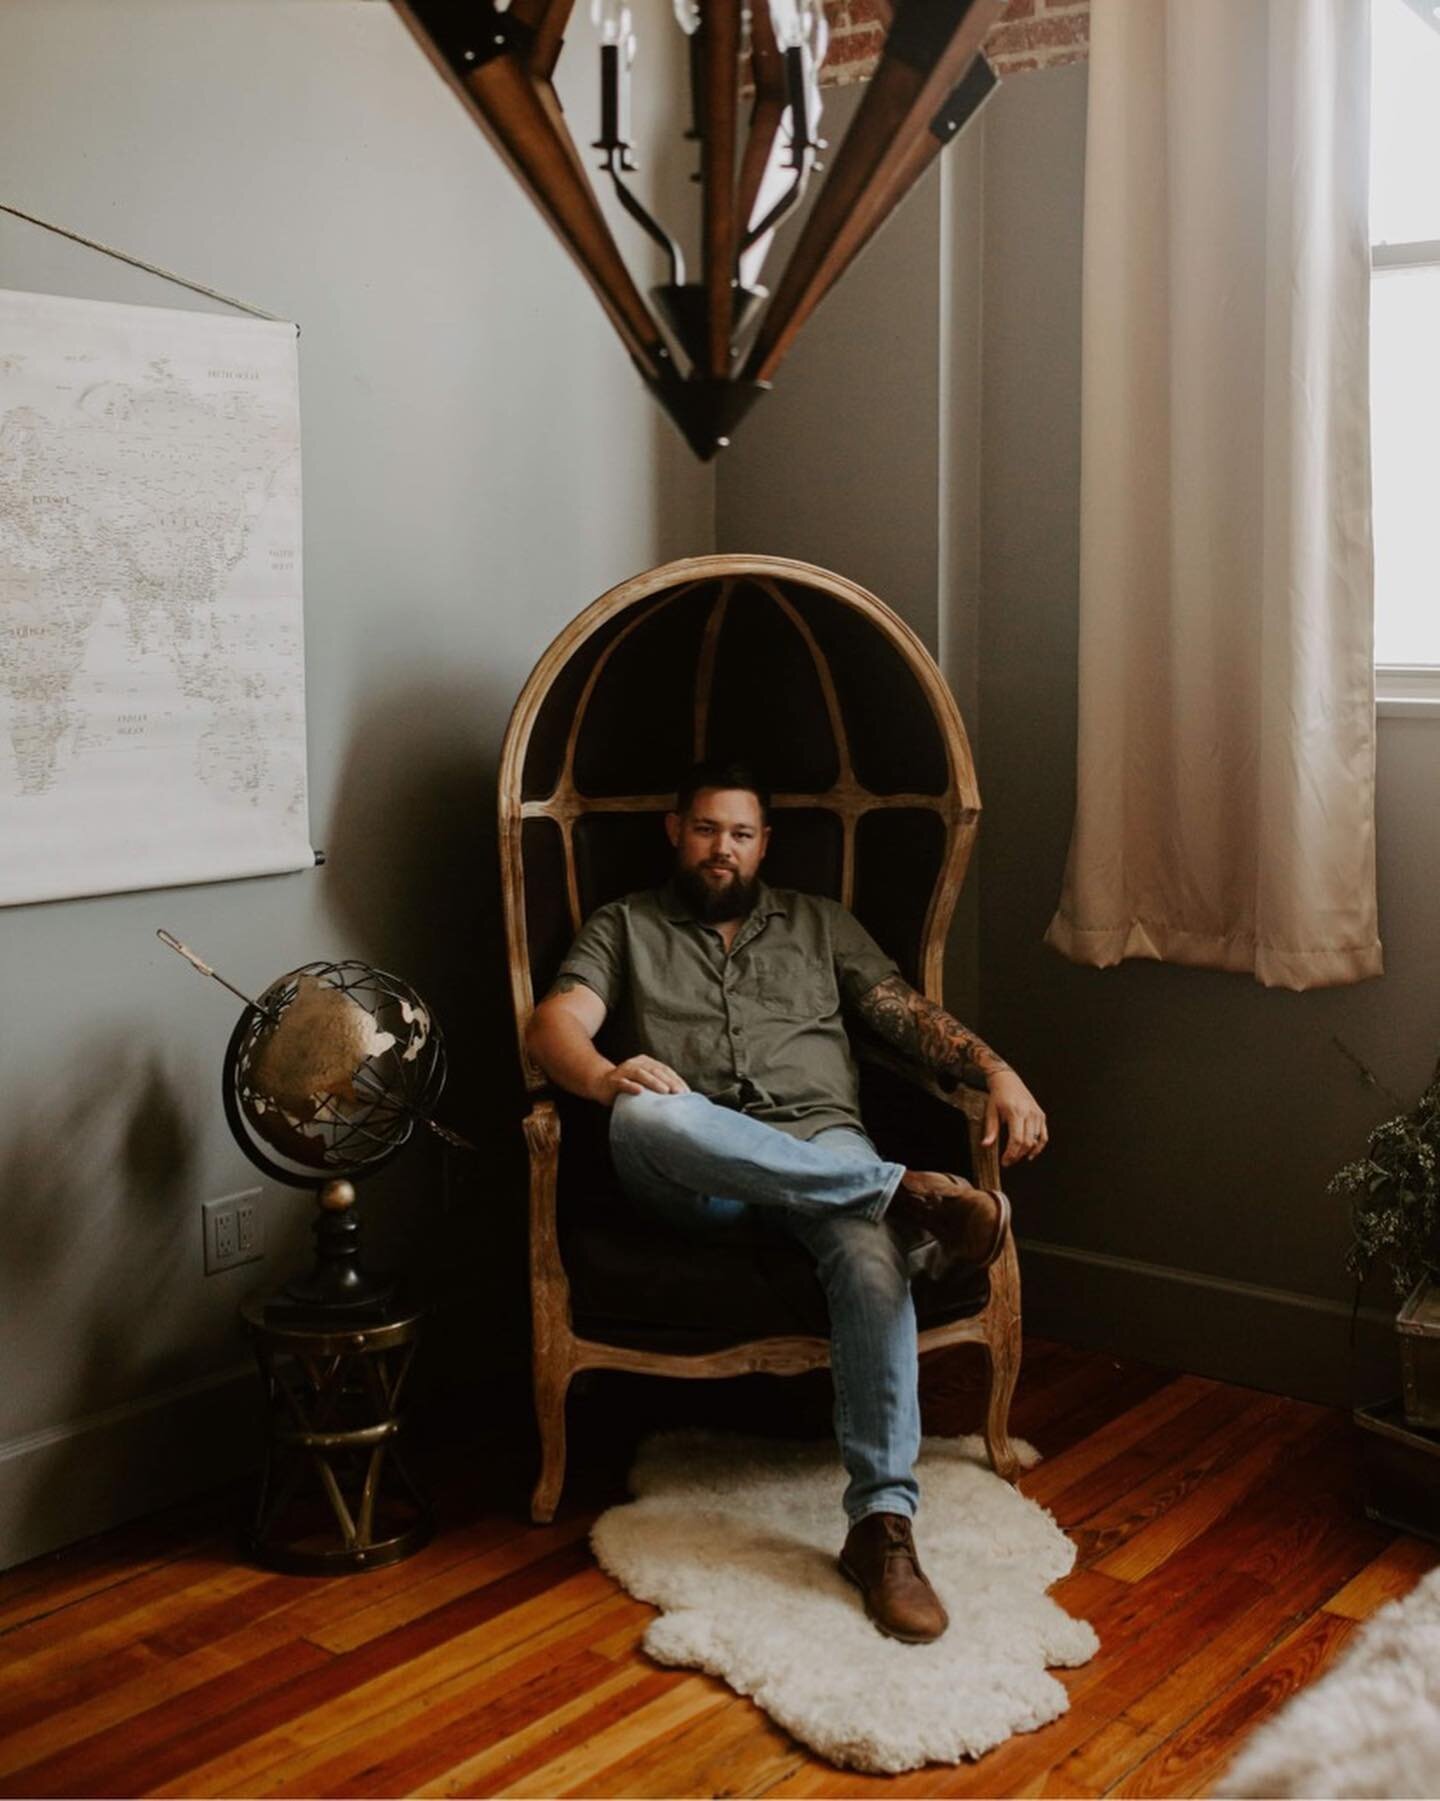 ✨Alloura Studio✨

🚨Hot dad alert 🚨 

Bearded and tattooed. I might have side tracked my maternity shoot to request some solo of the man behind Lion &amp; Ram. 

📷 @sarahgraybealphoto